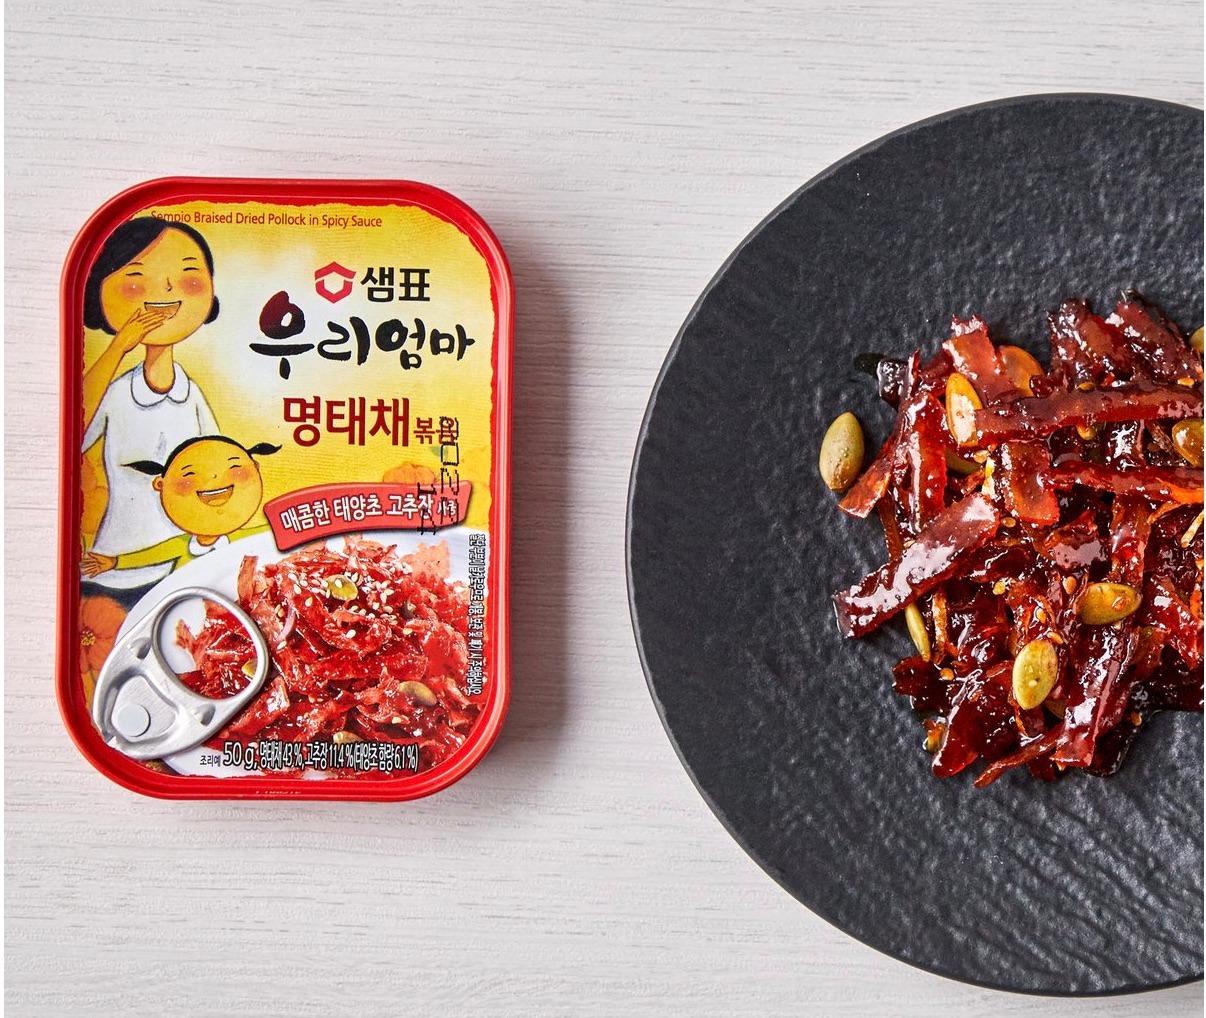 korean brand sempio's stir-fried dried pollock in gochujang in a can and plated